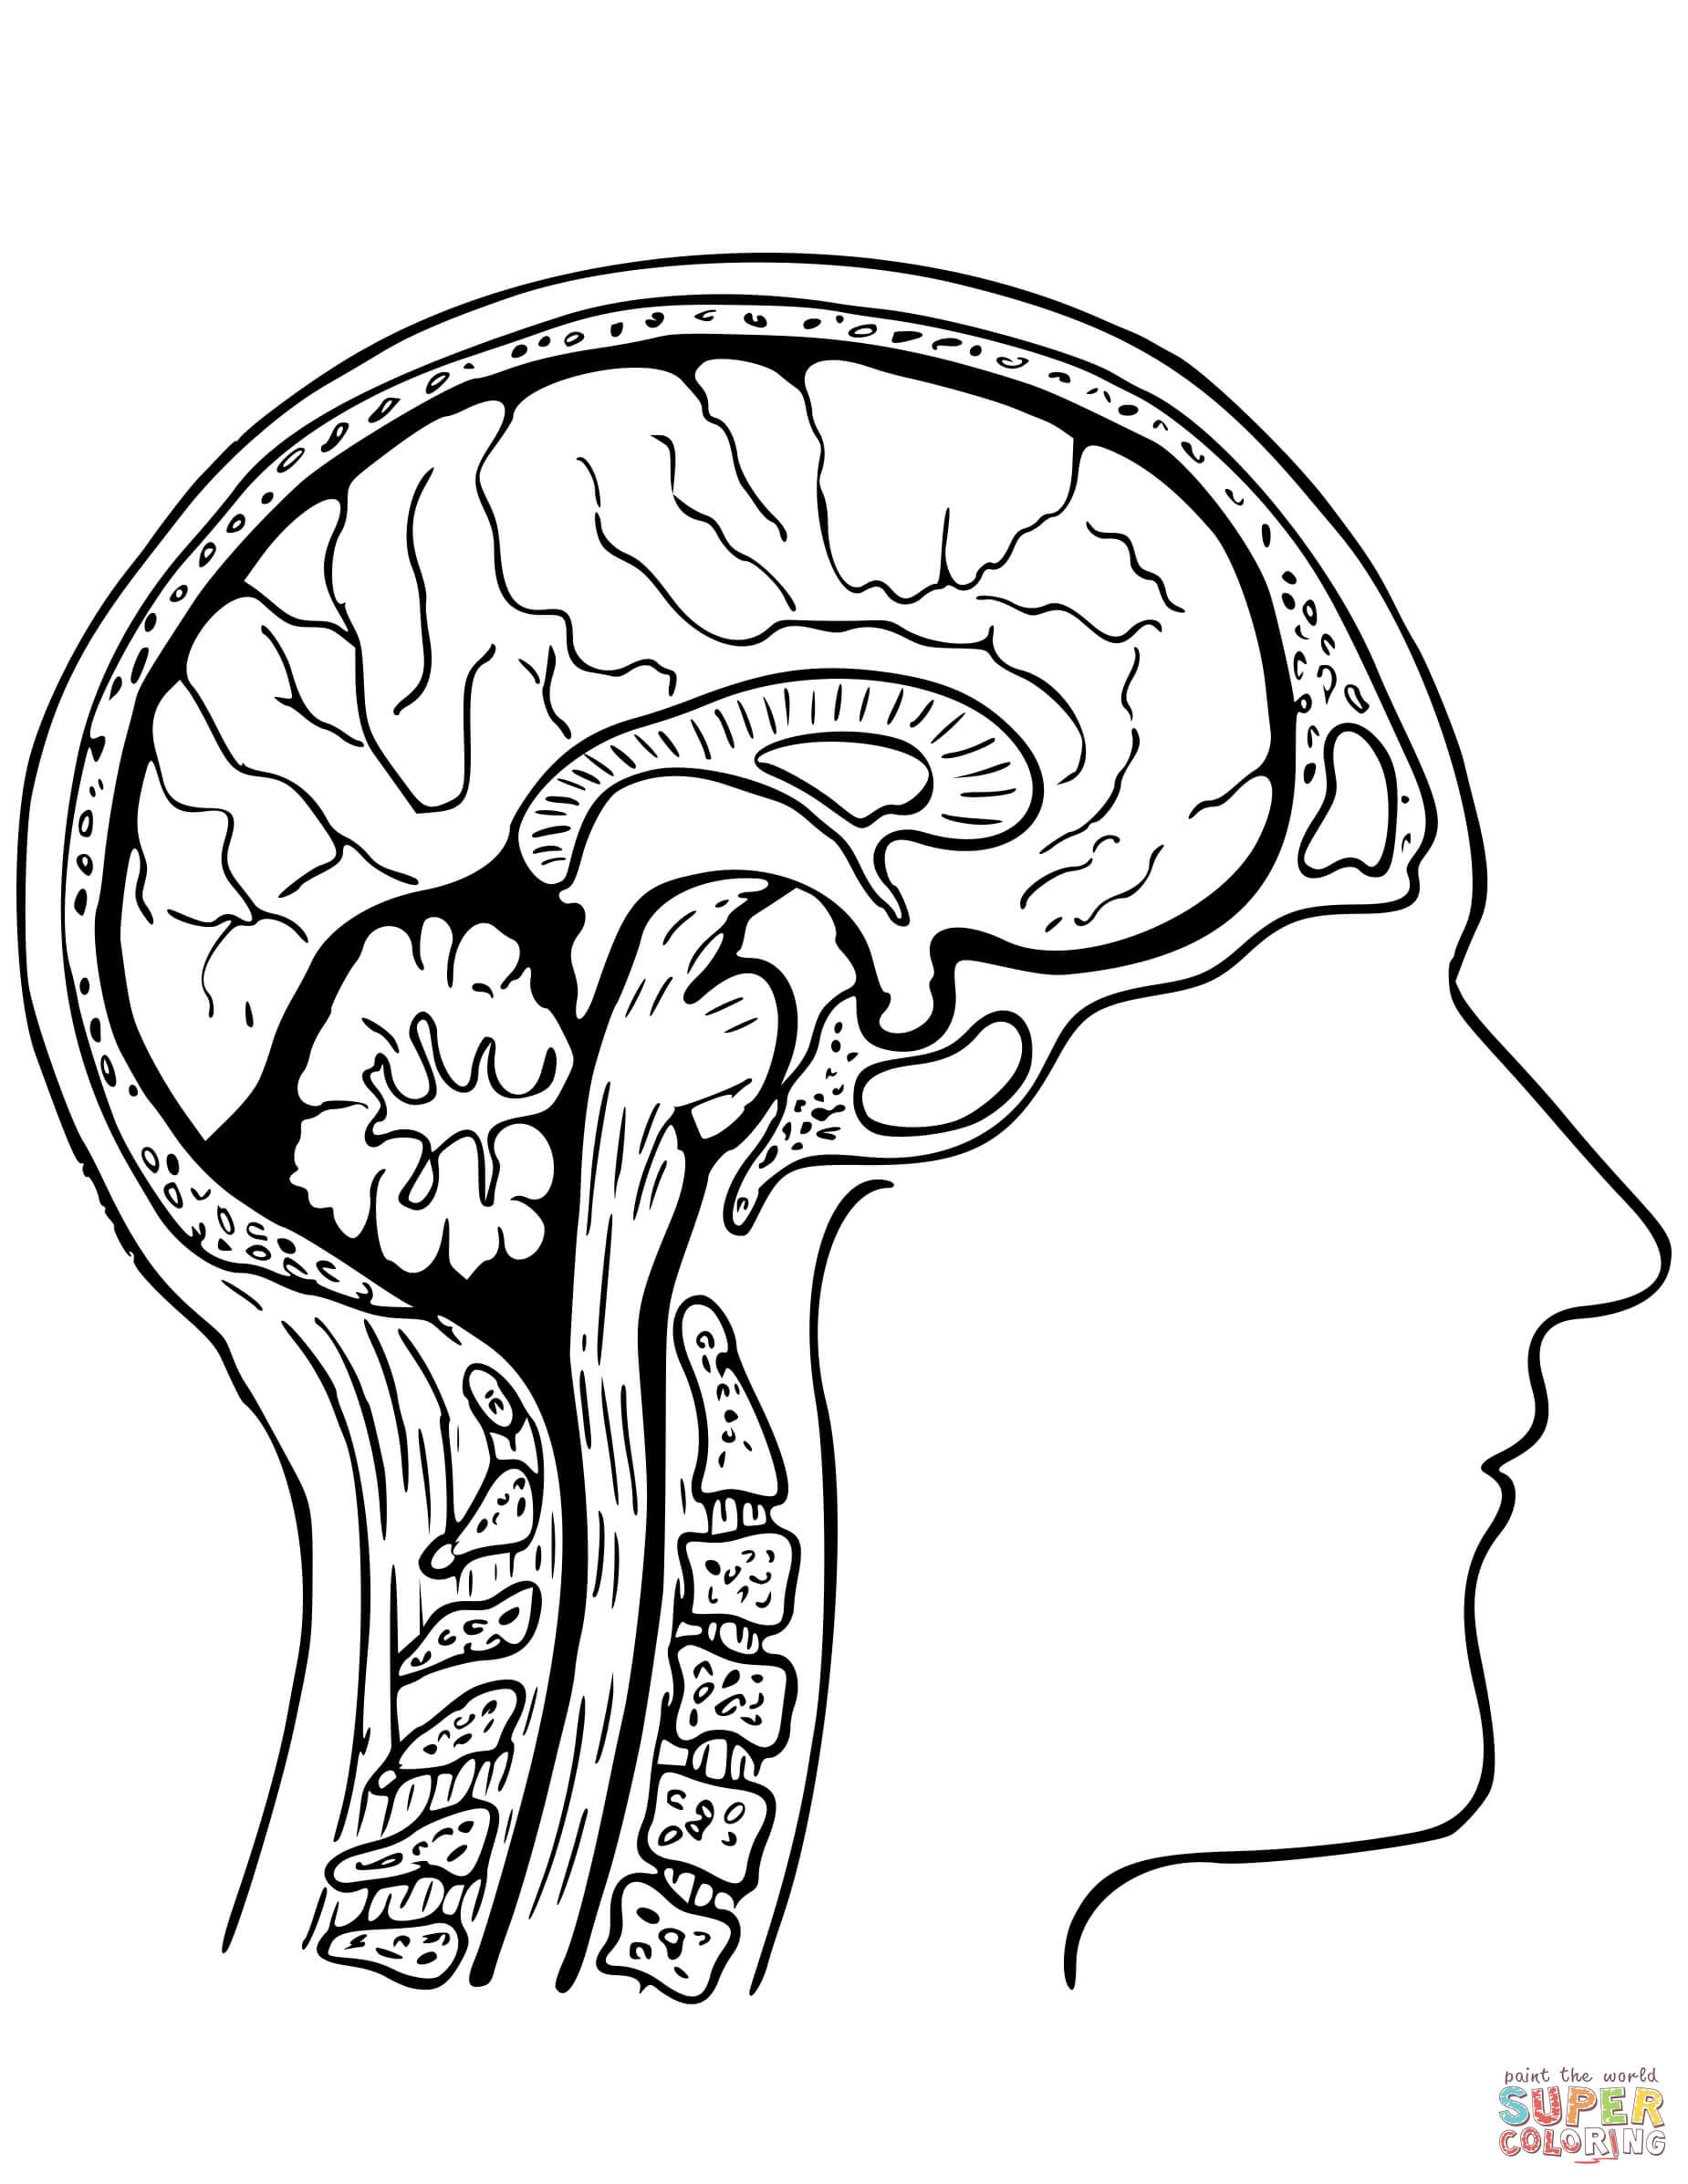 Human Brain Coloring Page  Free Printable Coloring Pages